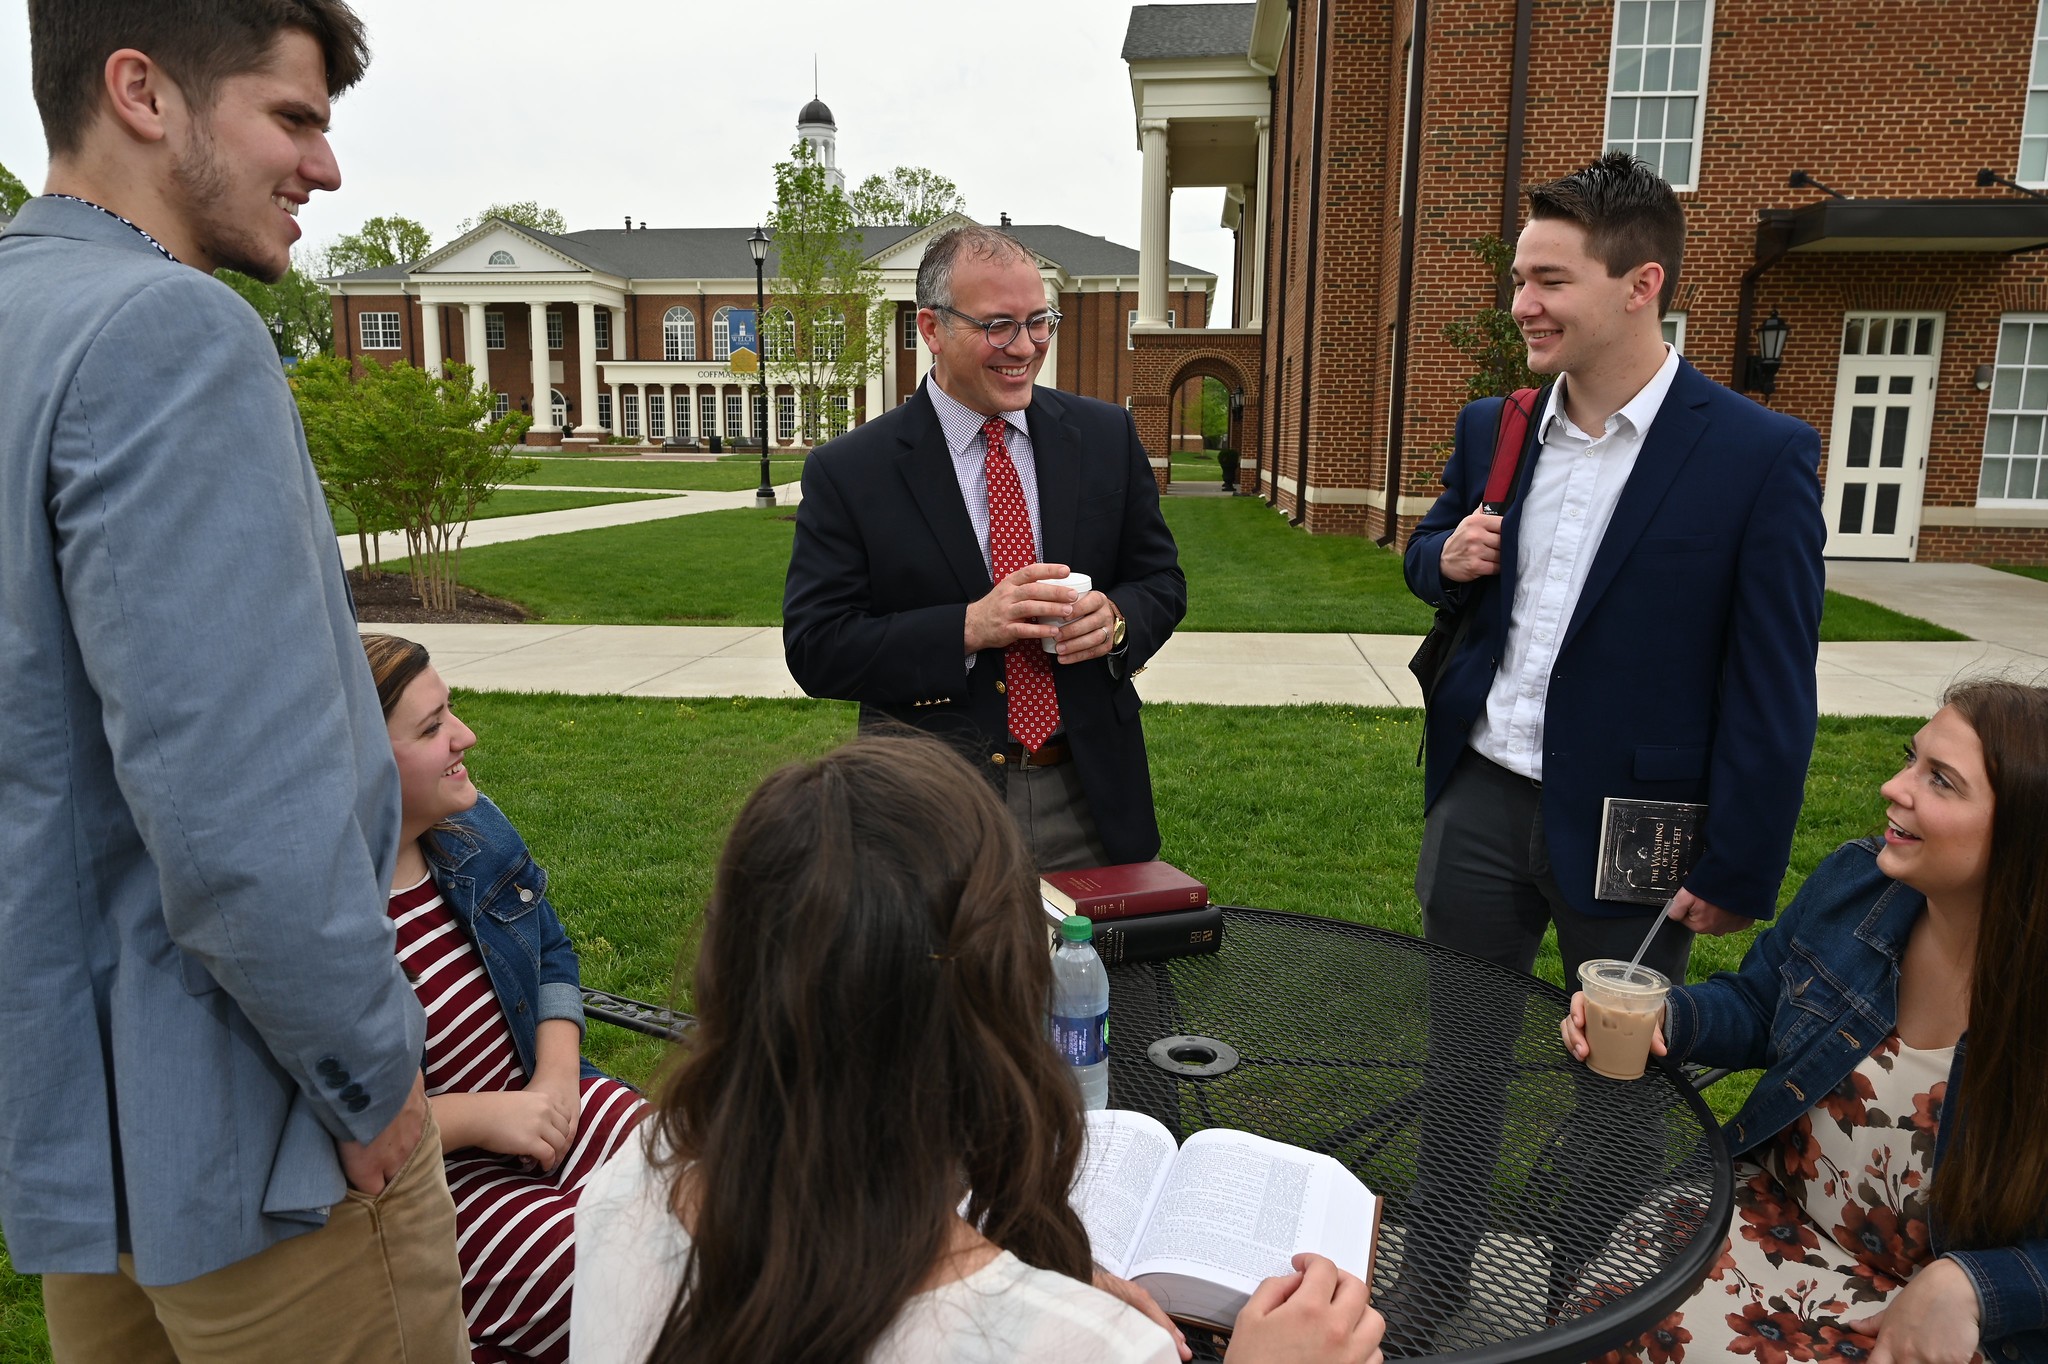 Provost Dr. Matthew McAffee visiting with students on the Quad at Welch College Campus - a Christian Bible College in Gallatin, Tennessee